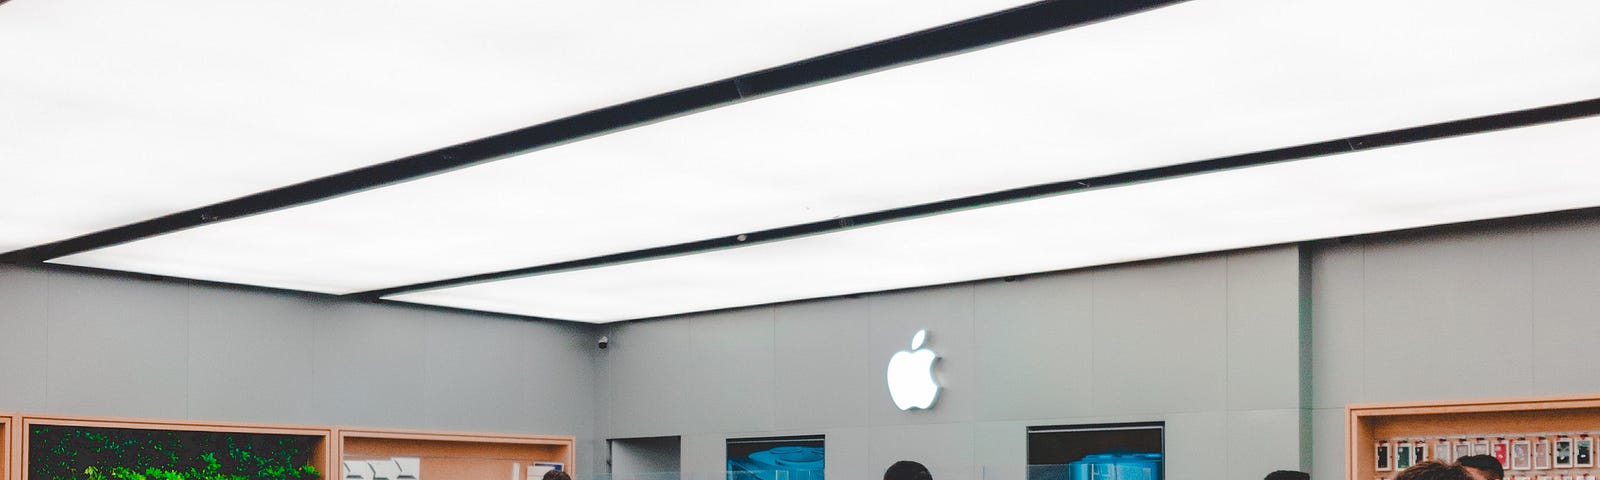 The image depicts the interior of an Apple Store. You can see the iconic minimalist design with wooden tables displaying products. There are several customers and staff members inside, some are looking at products, and others are conversing. Above, large, bright ceiling panels illuminate the space, and the Apple logo is visible in the background, glowing on a wall panel. The setting is typical of Apple’s retail locations, known for their open layouts and hands-on product displays.